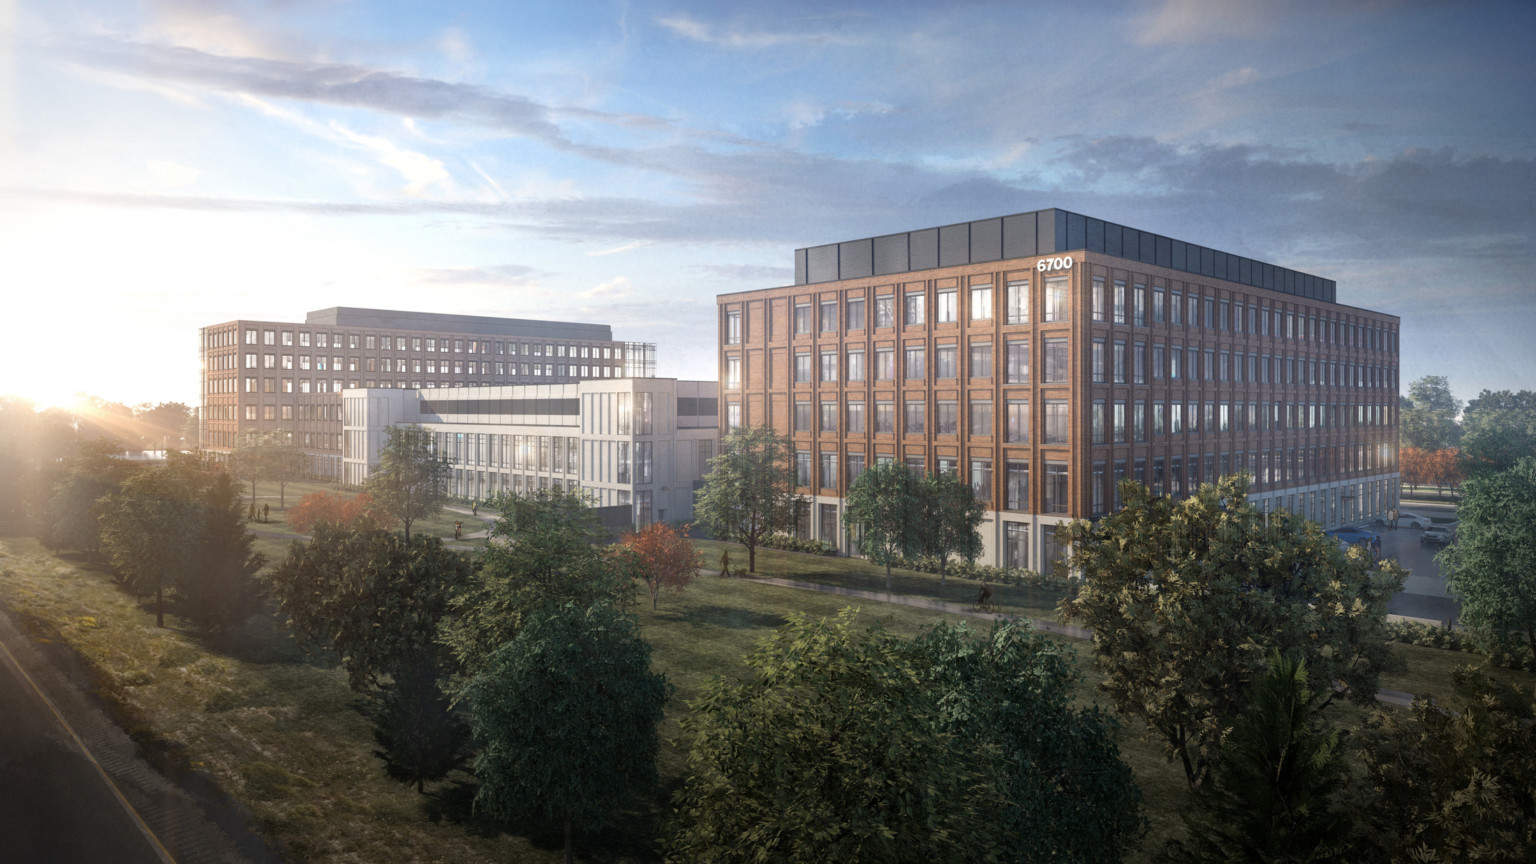 Rendering of exterior view of Ohio State University Wexner Medical Center Outpatient Care Facilities